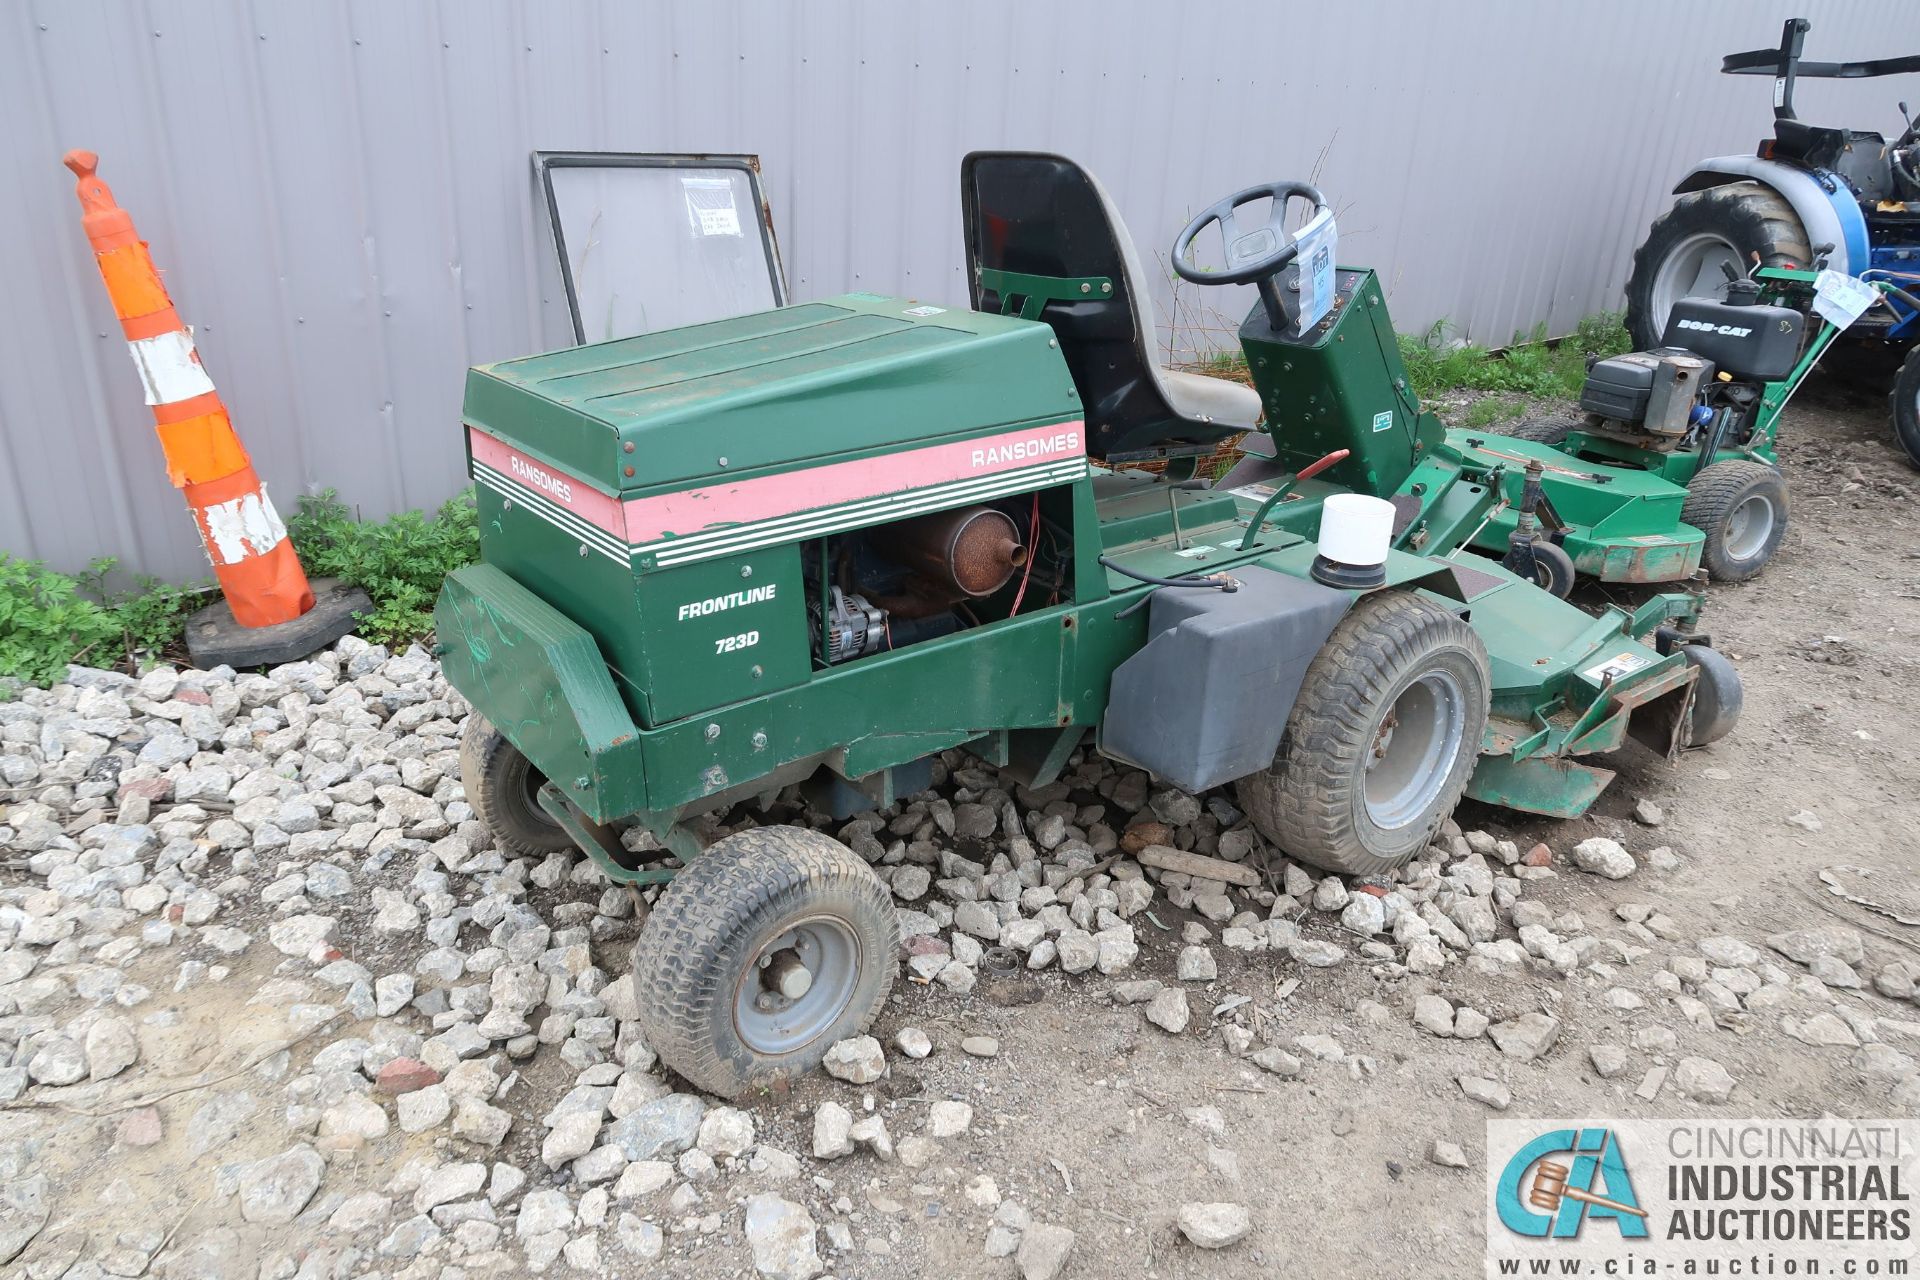 60" RANSOMES MODEL 723D KUBOTA DIESEL POWERED FRONT MOUNT MOWER DECK TRACTOR, 3,674 HOURS - Image 2 of 6